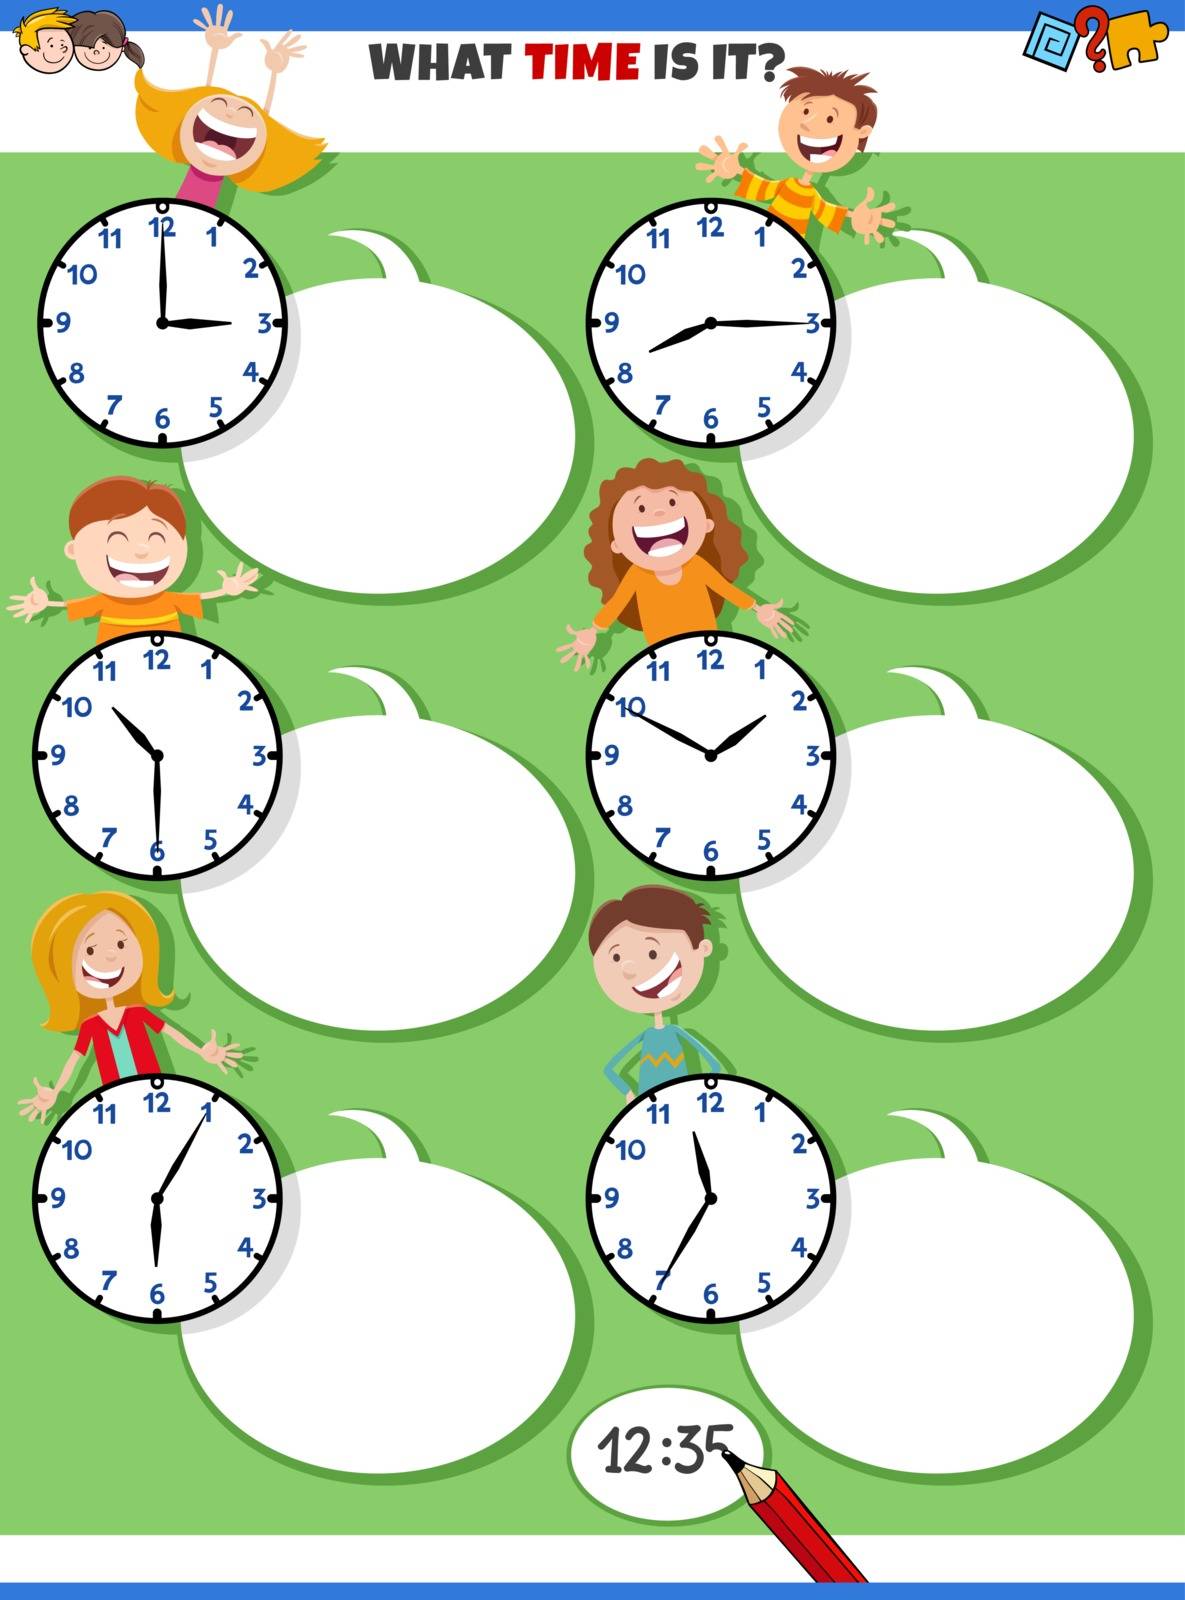 Cartoon Illustrations of Telling Time Educational Activity with Clock Face and Happy Children Characters